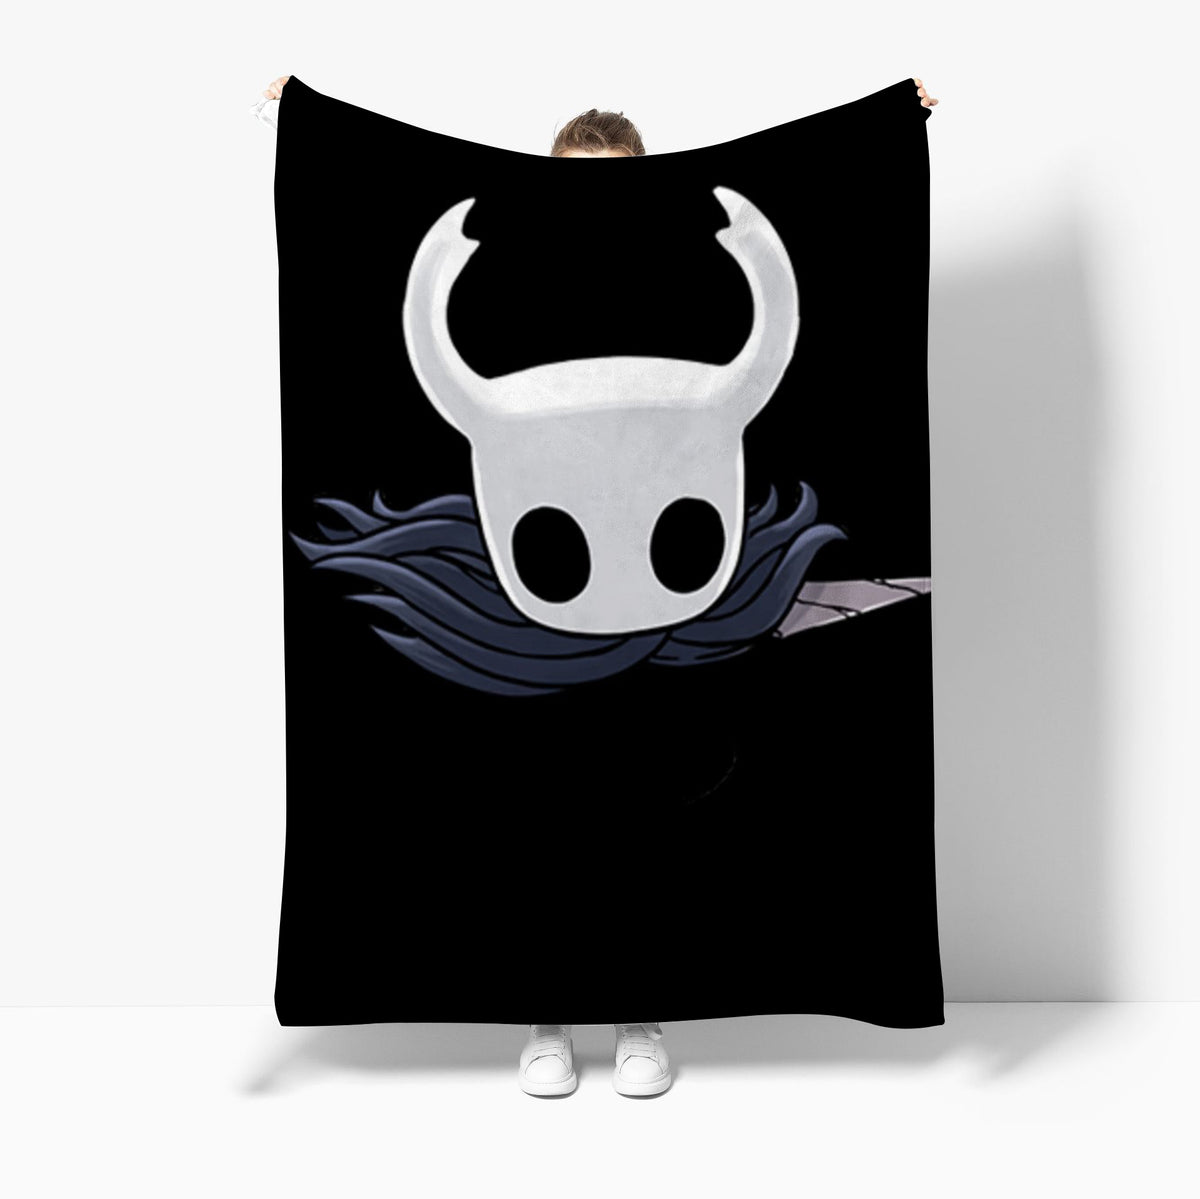 The Hollow Knight #1 3D Printed Plush Blanket Flannel Fleece Throw Warm Gift for Kids Adults Home Office